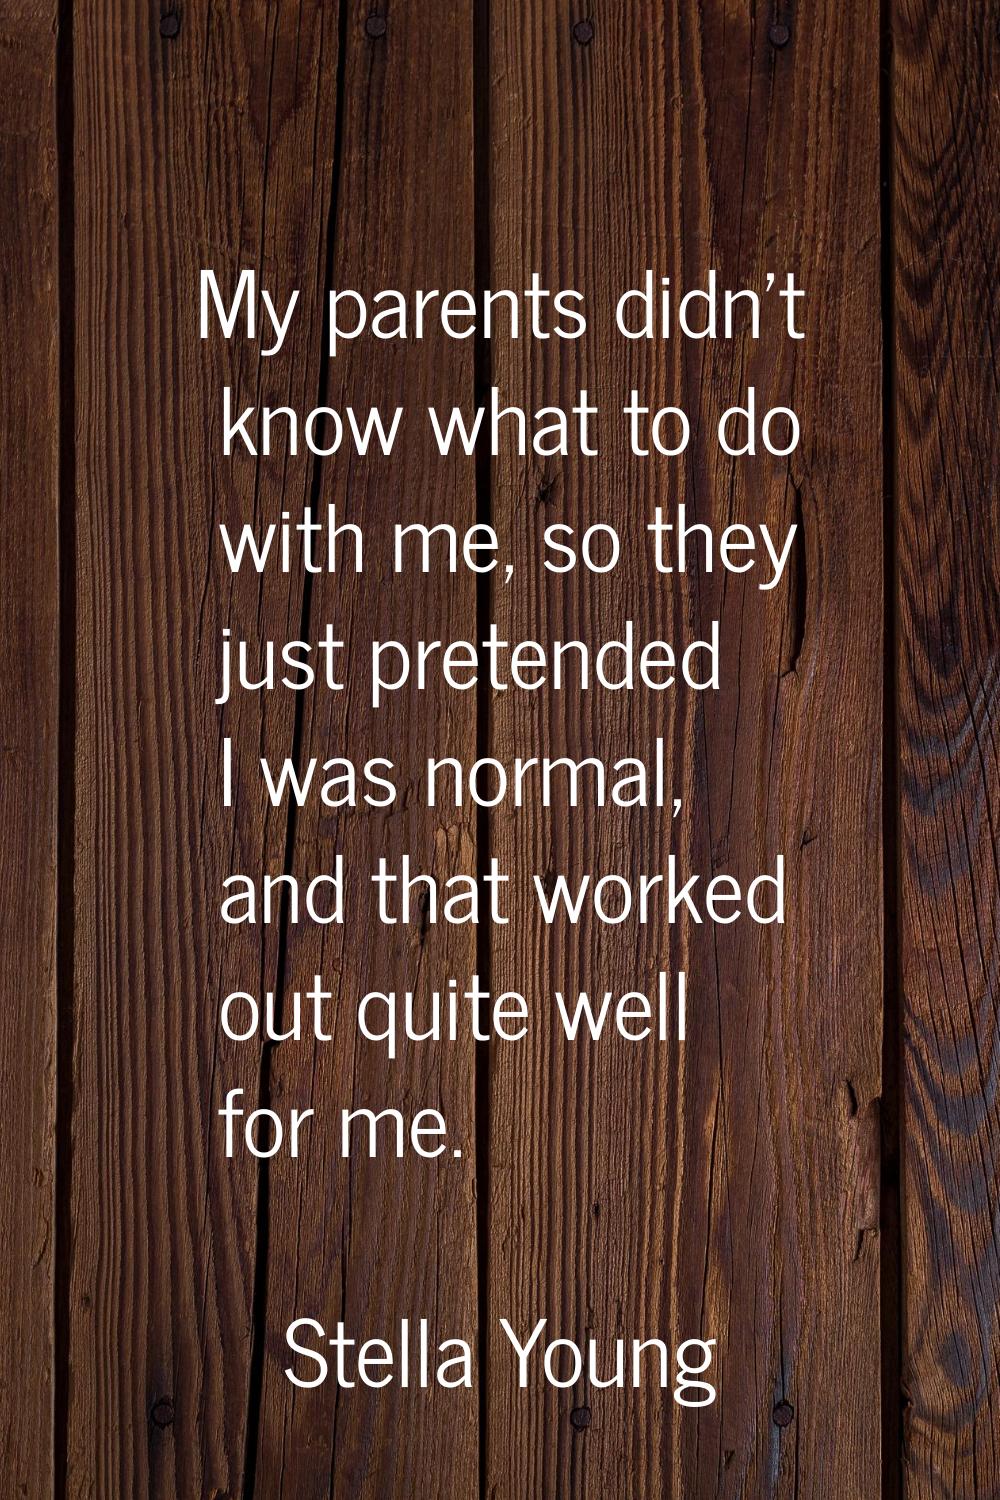 My parents didn't know what to do with me, so they just pretended I was normal, and that worked out